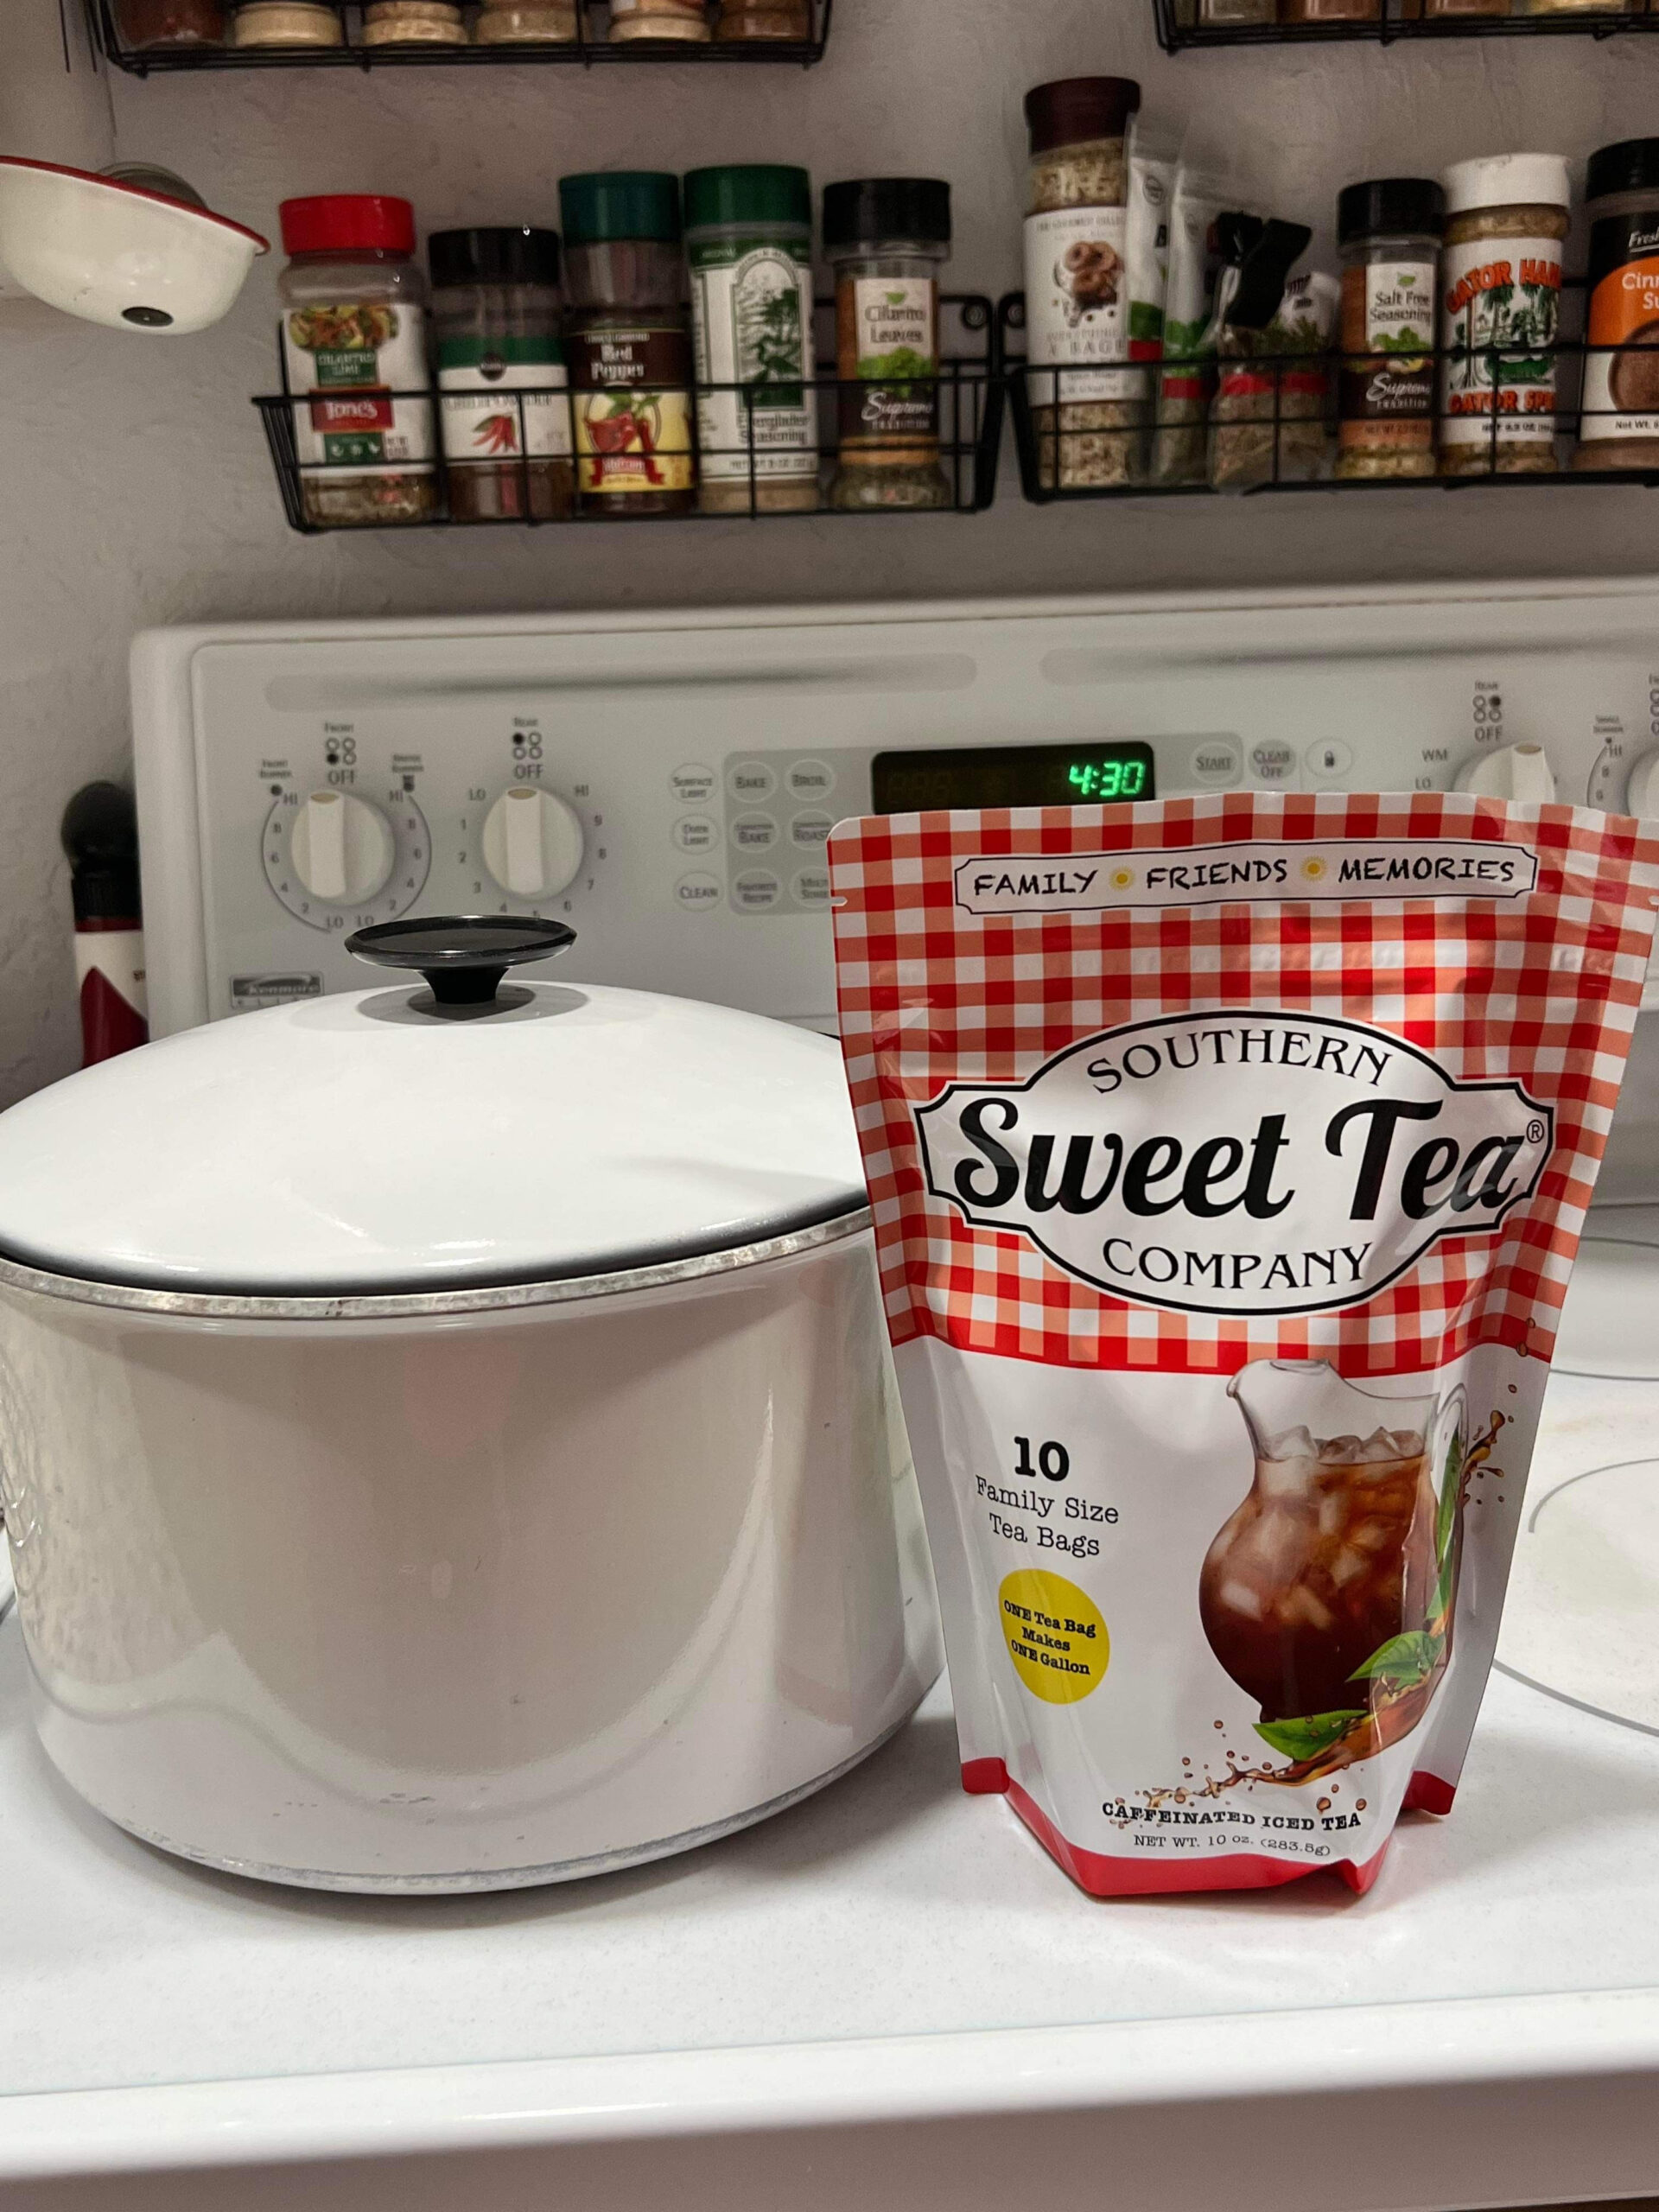 https://southernsweetteacompany.com/wp-content/uploads/2023/04/Sweet-tea-bag-on-Stove-scaled.jpg